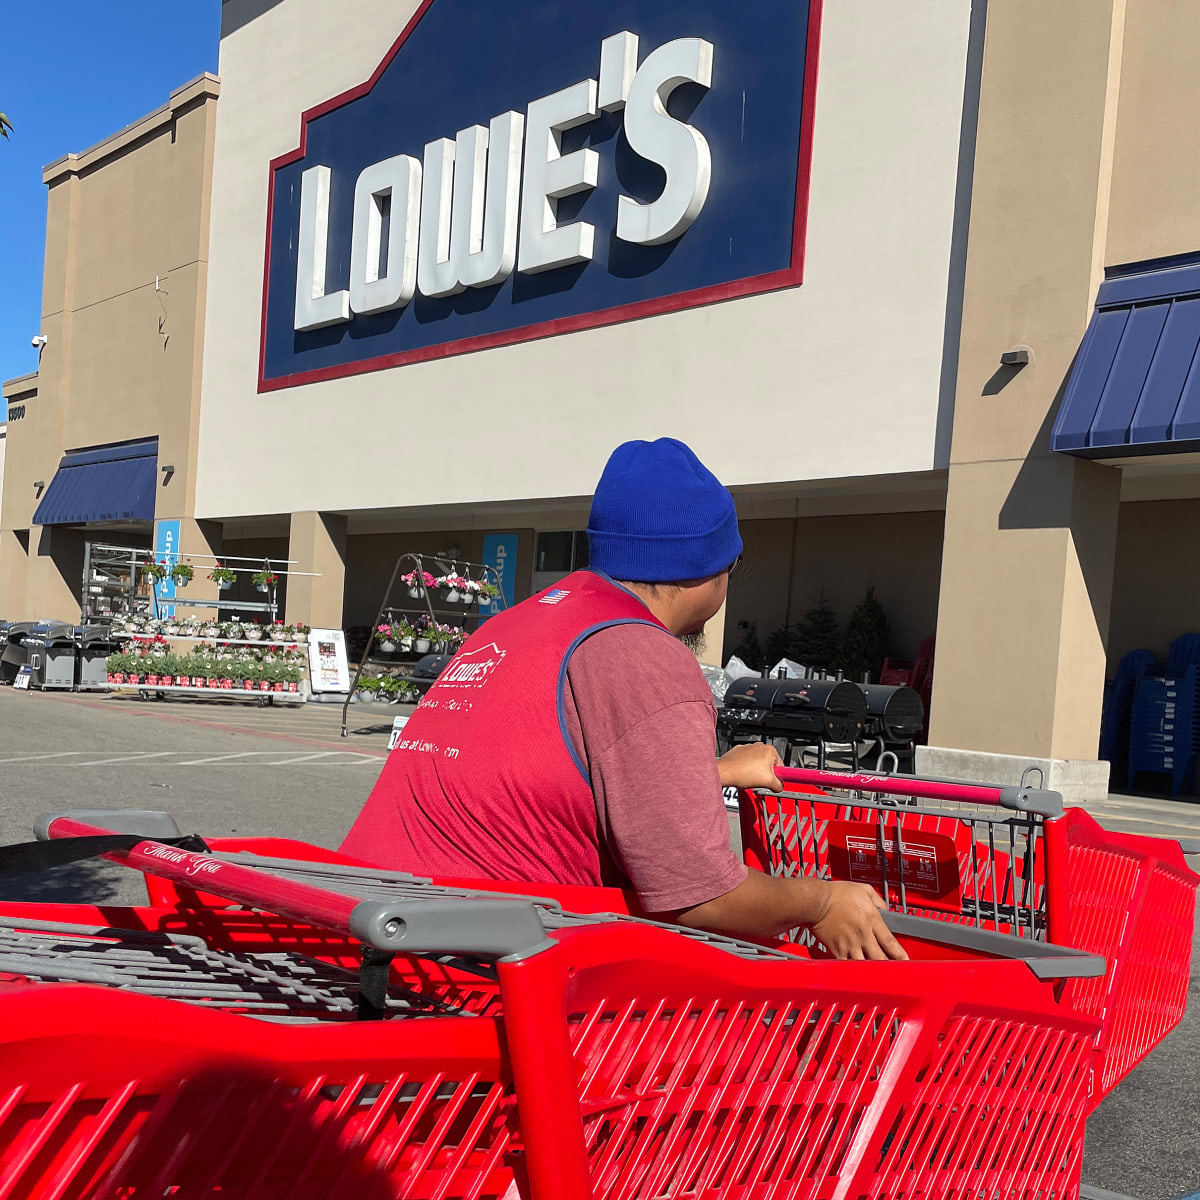 Lowe's jobs & what they pay: Customer service, sales, cashier